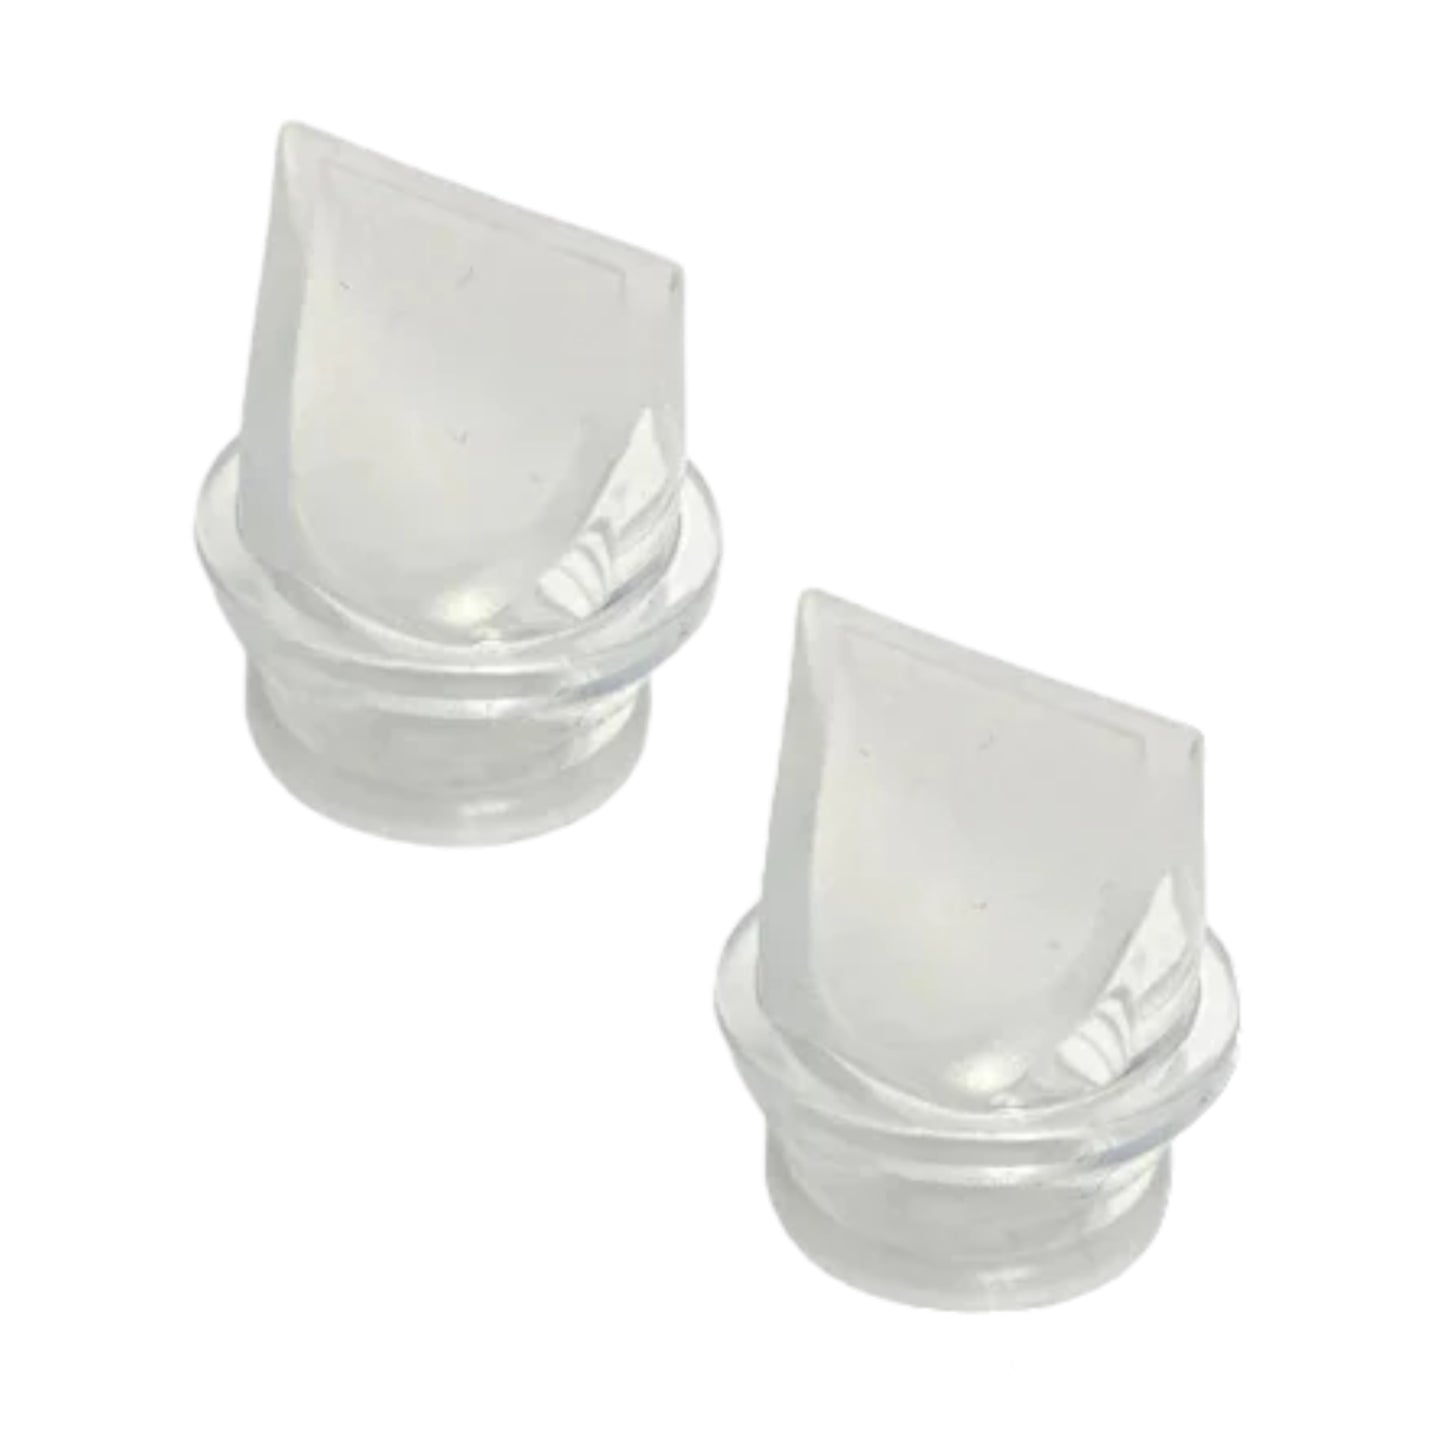 Wisemom On The Go Clear Valve - Pair